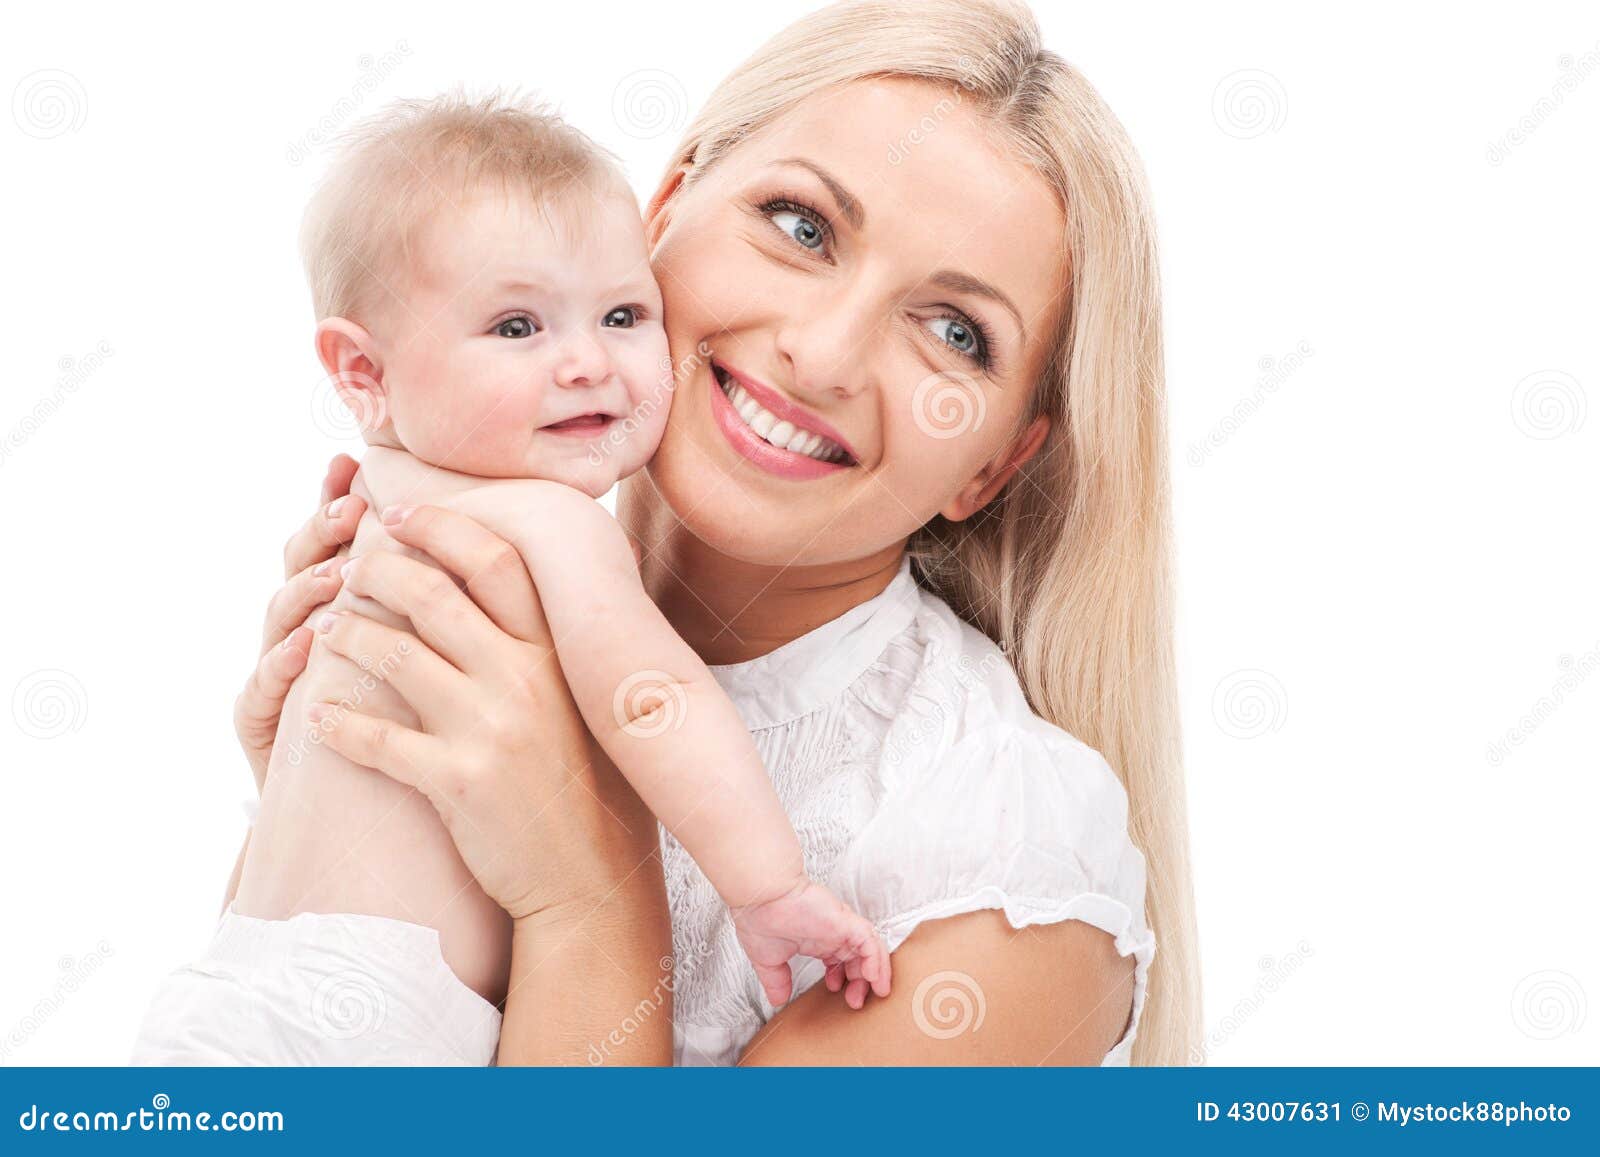 young mum hugging small baby. beautiful blond holding baby and smiling